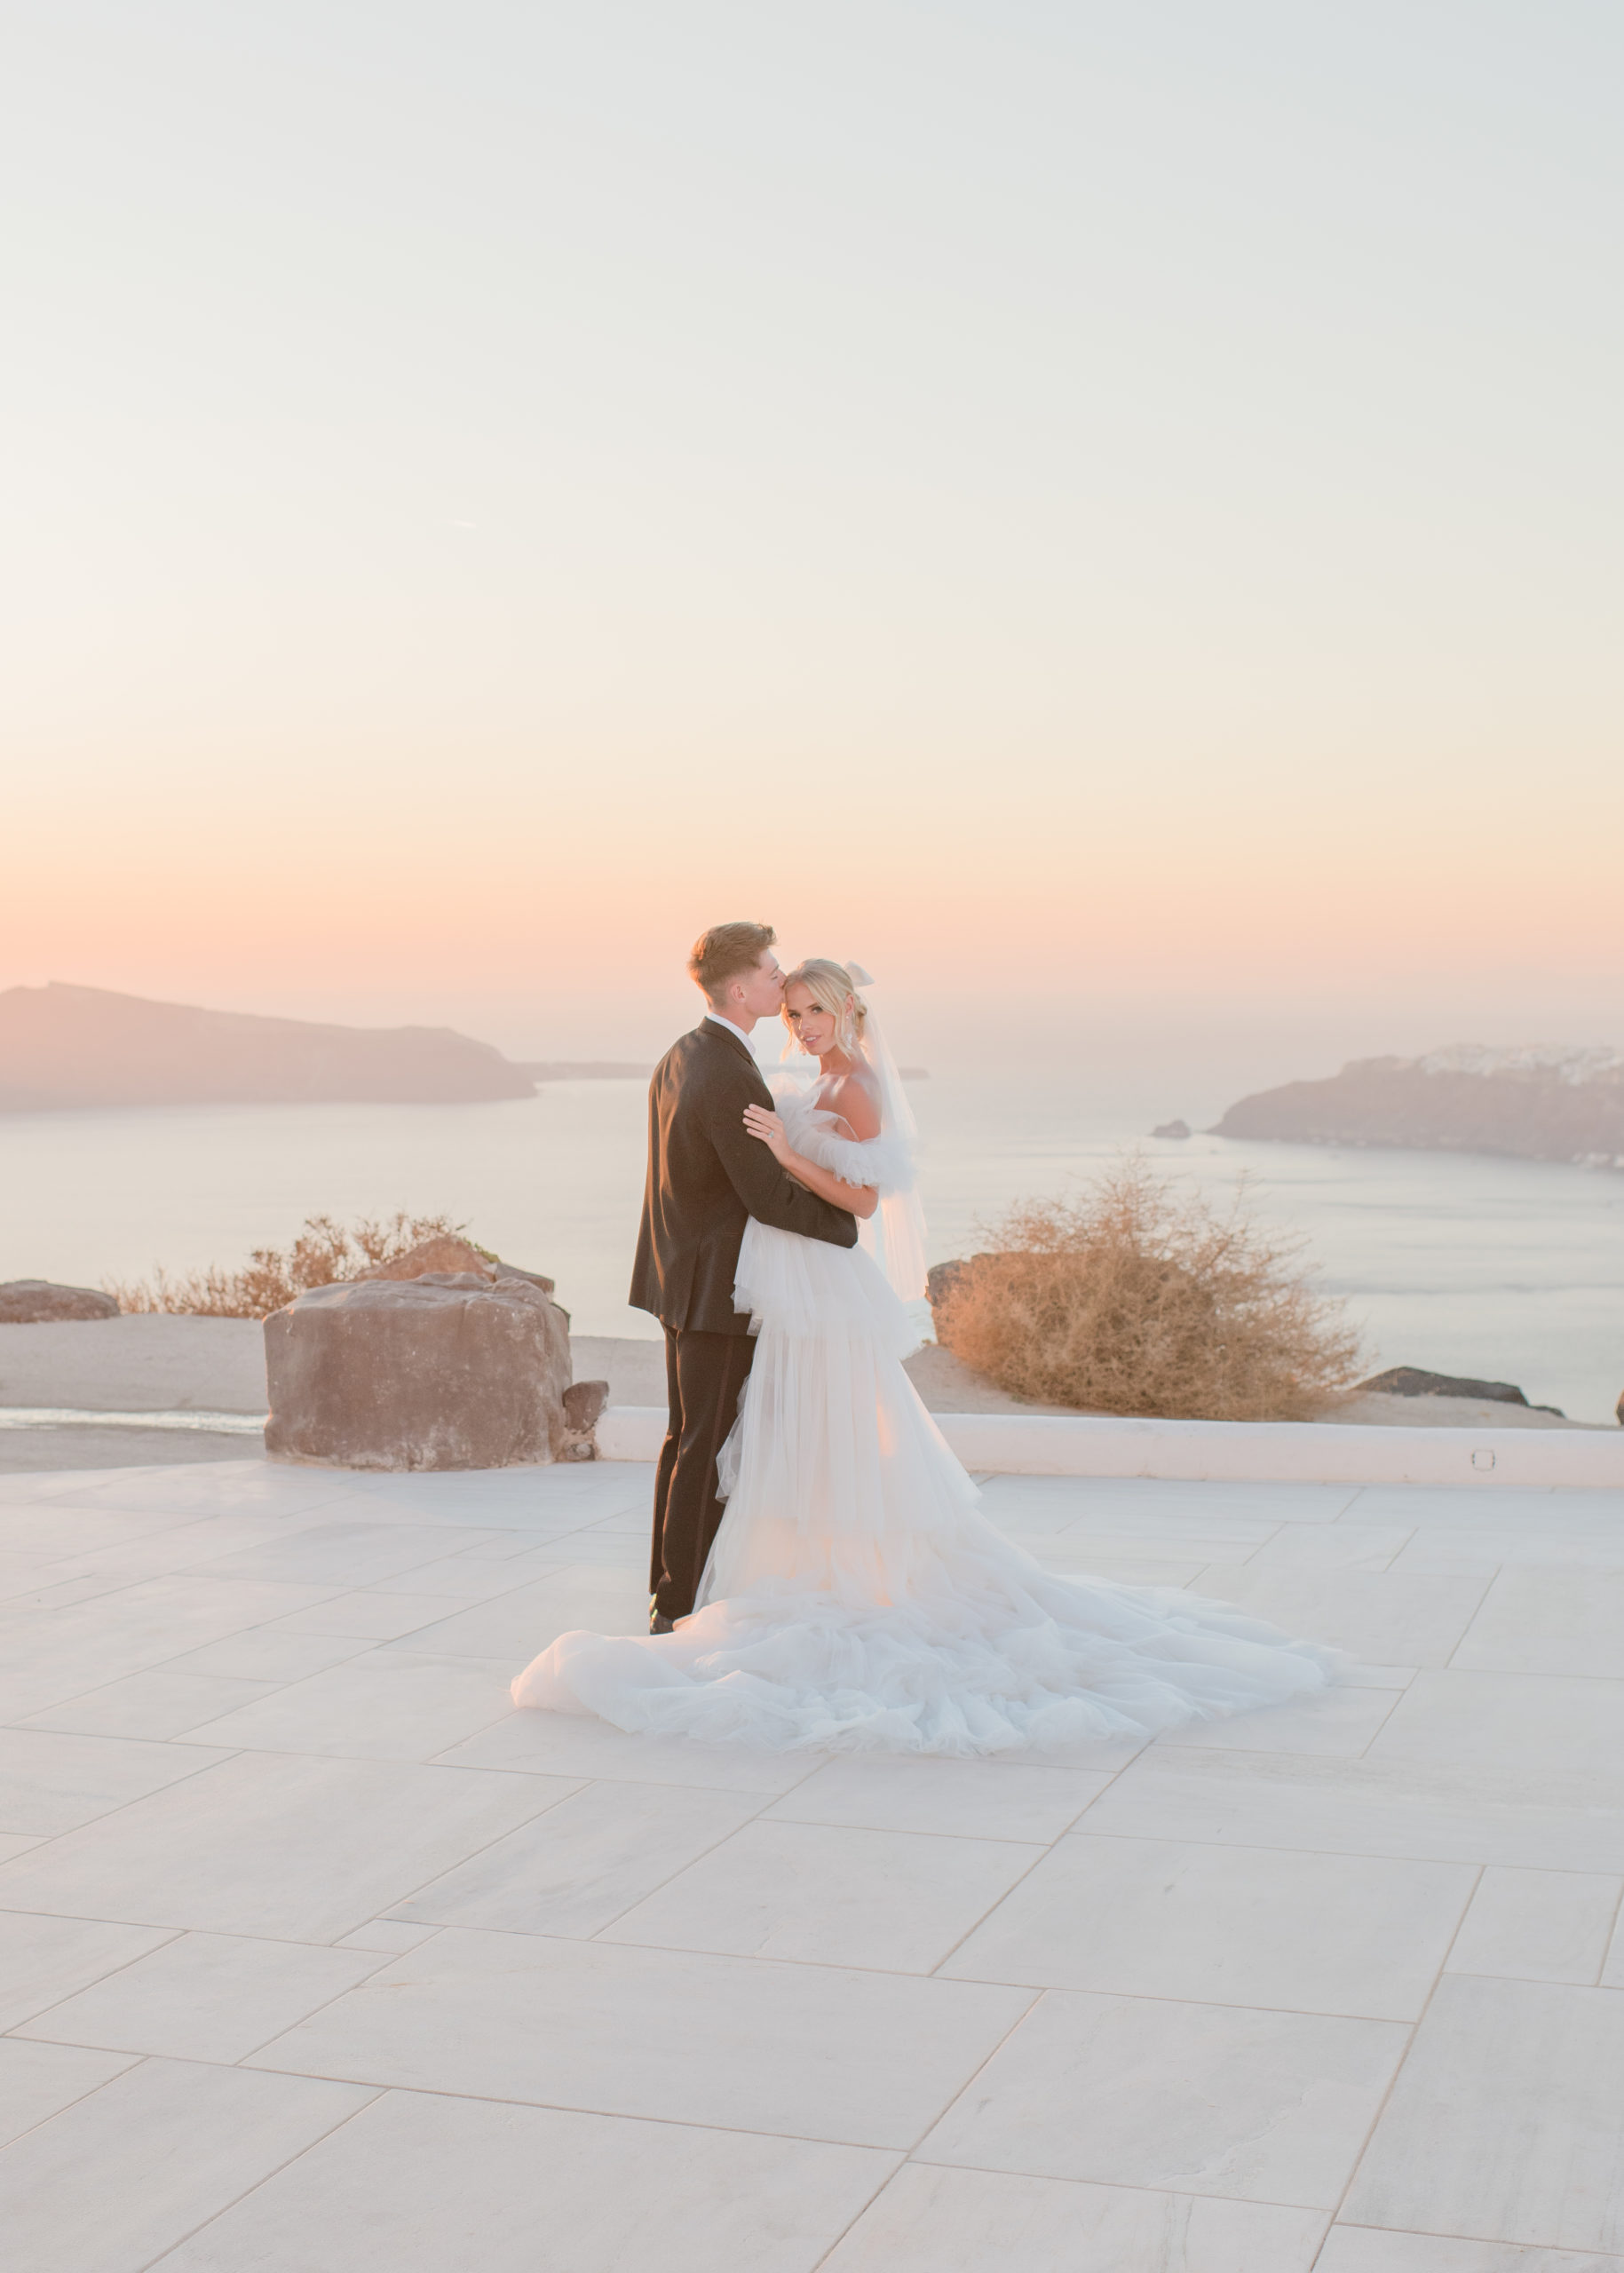 Best place to have a destination wedding